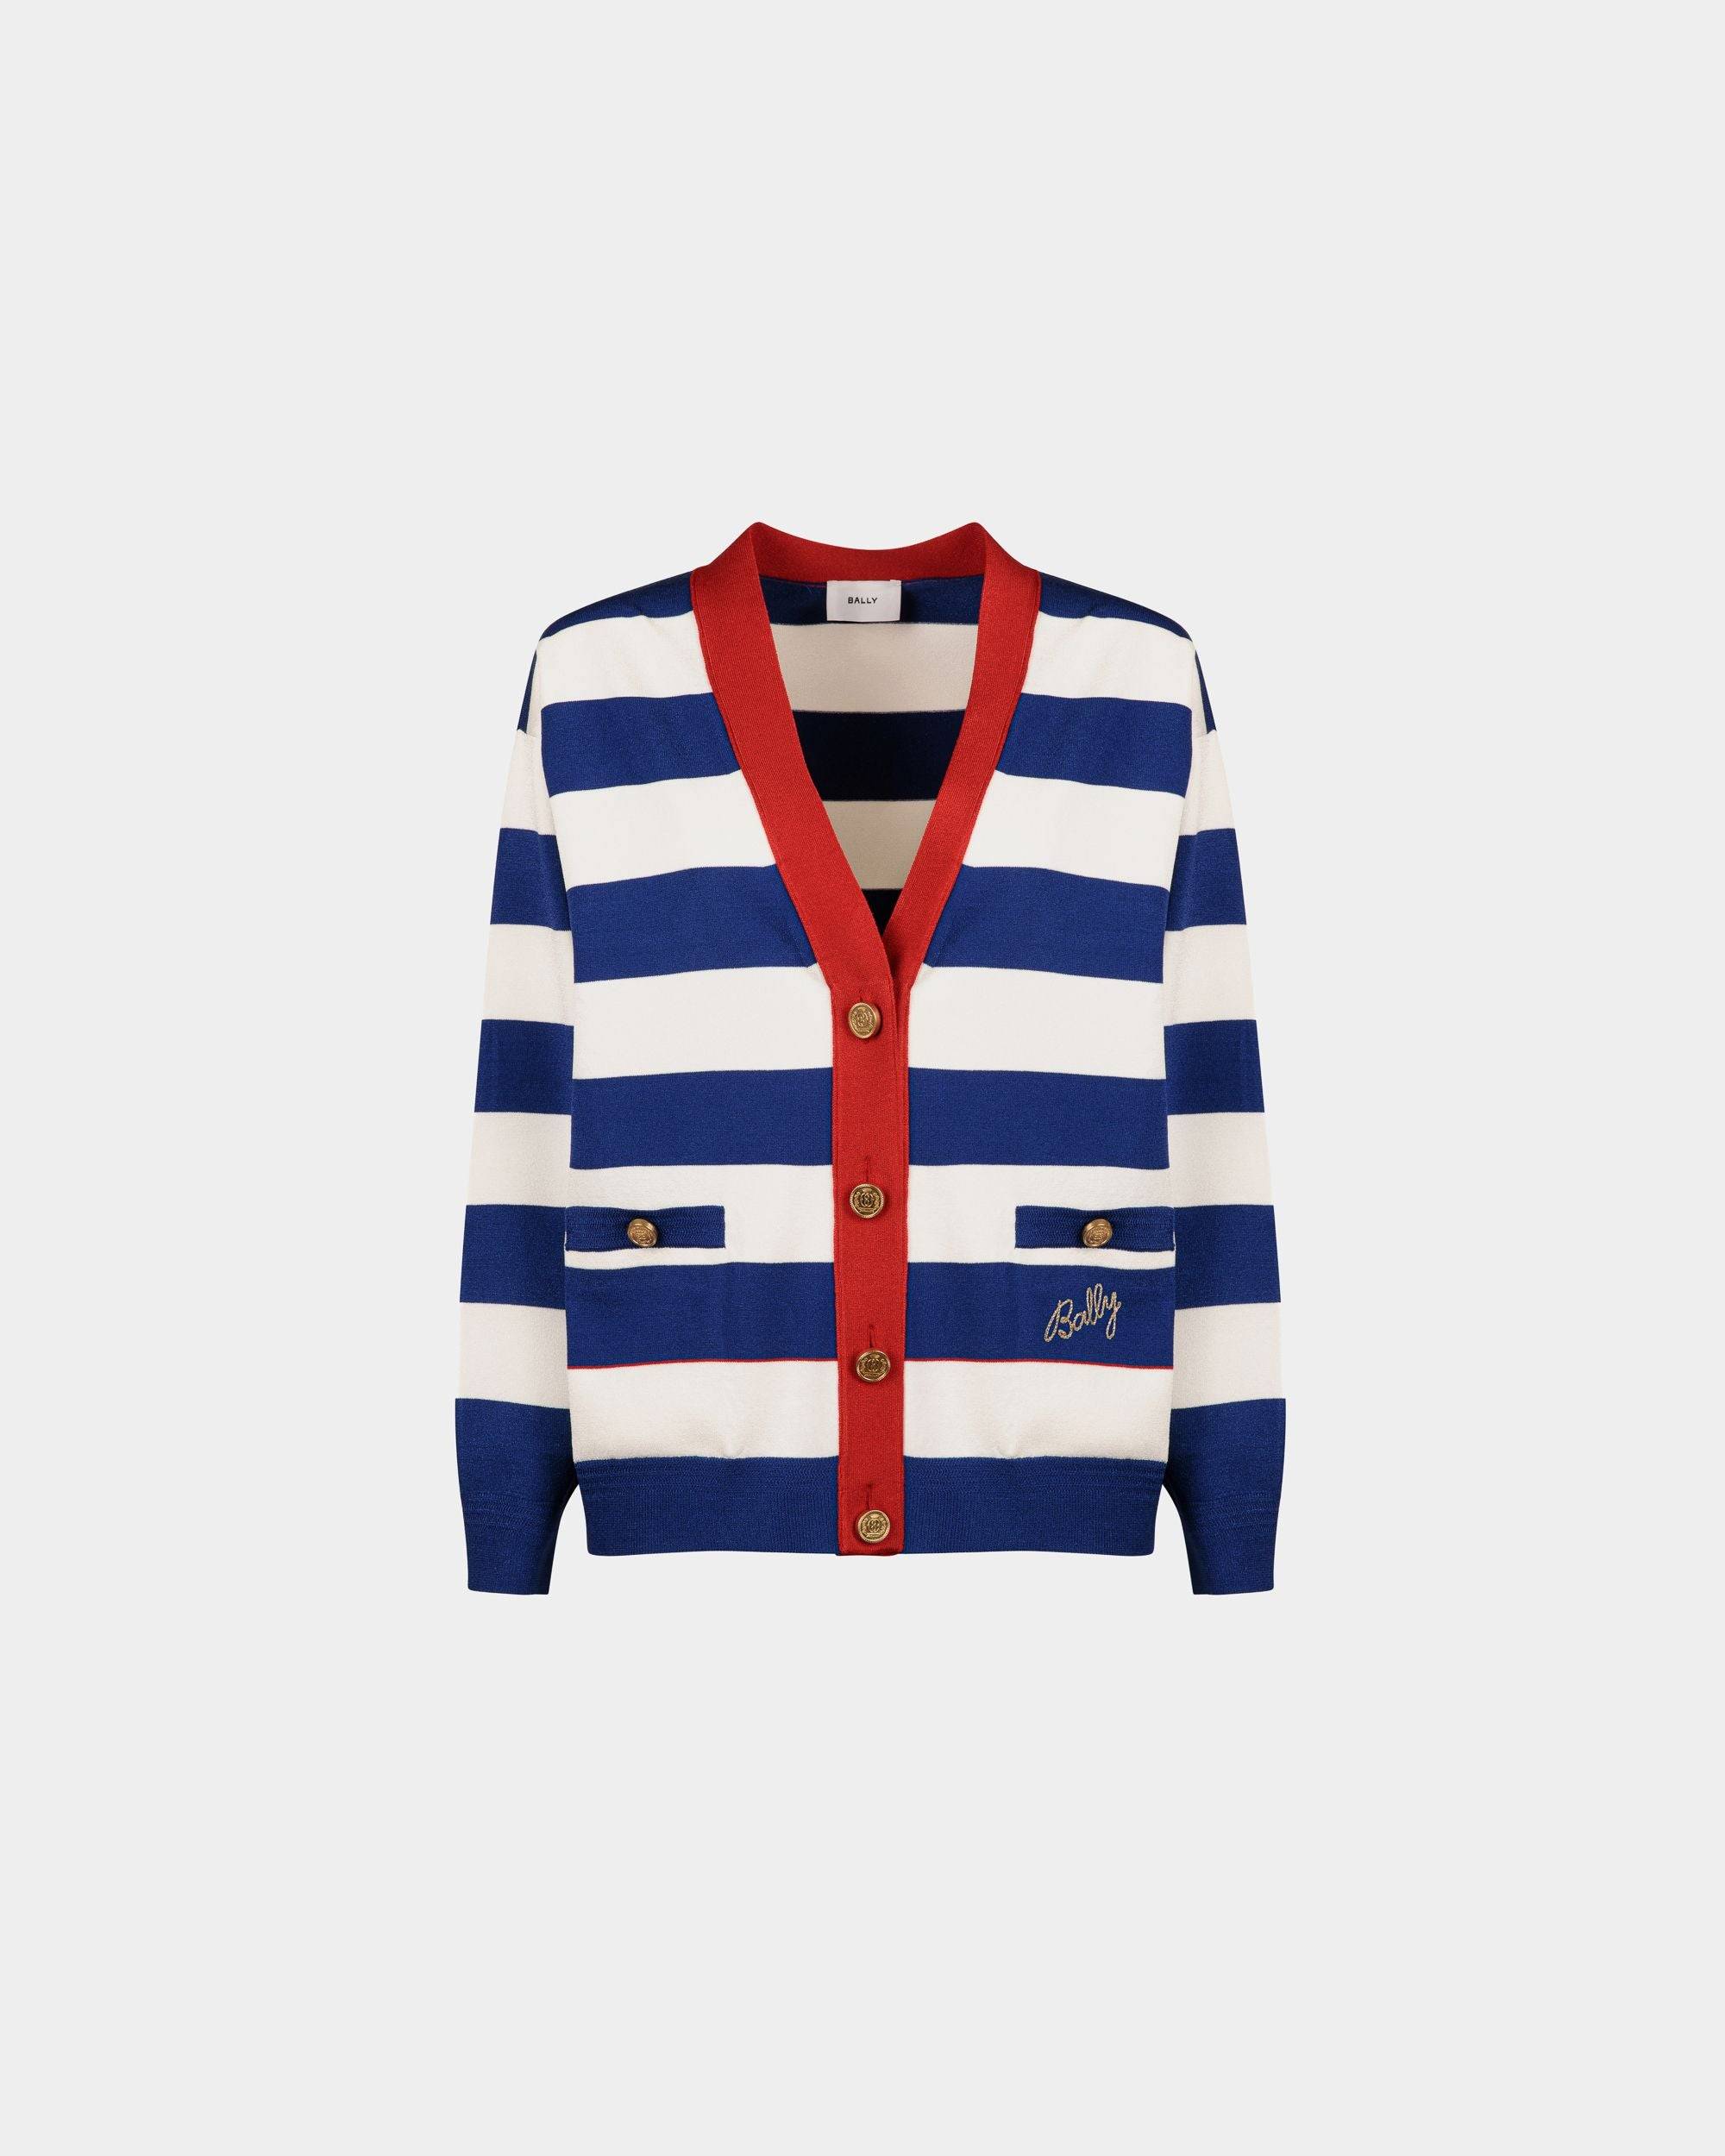 Women's White And Blue Striped Cardigan | Bally | Still Life Front